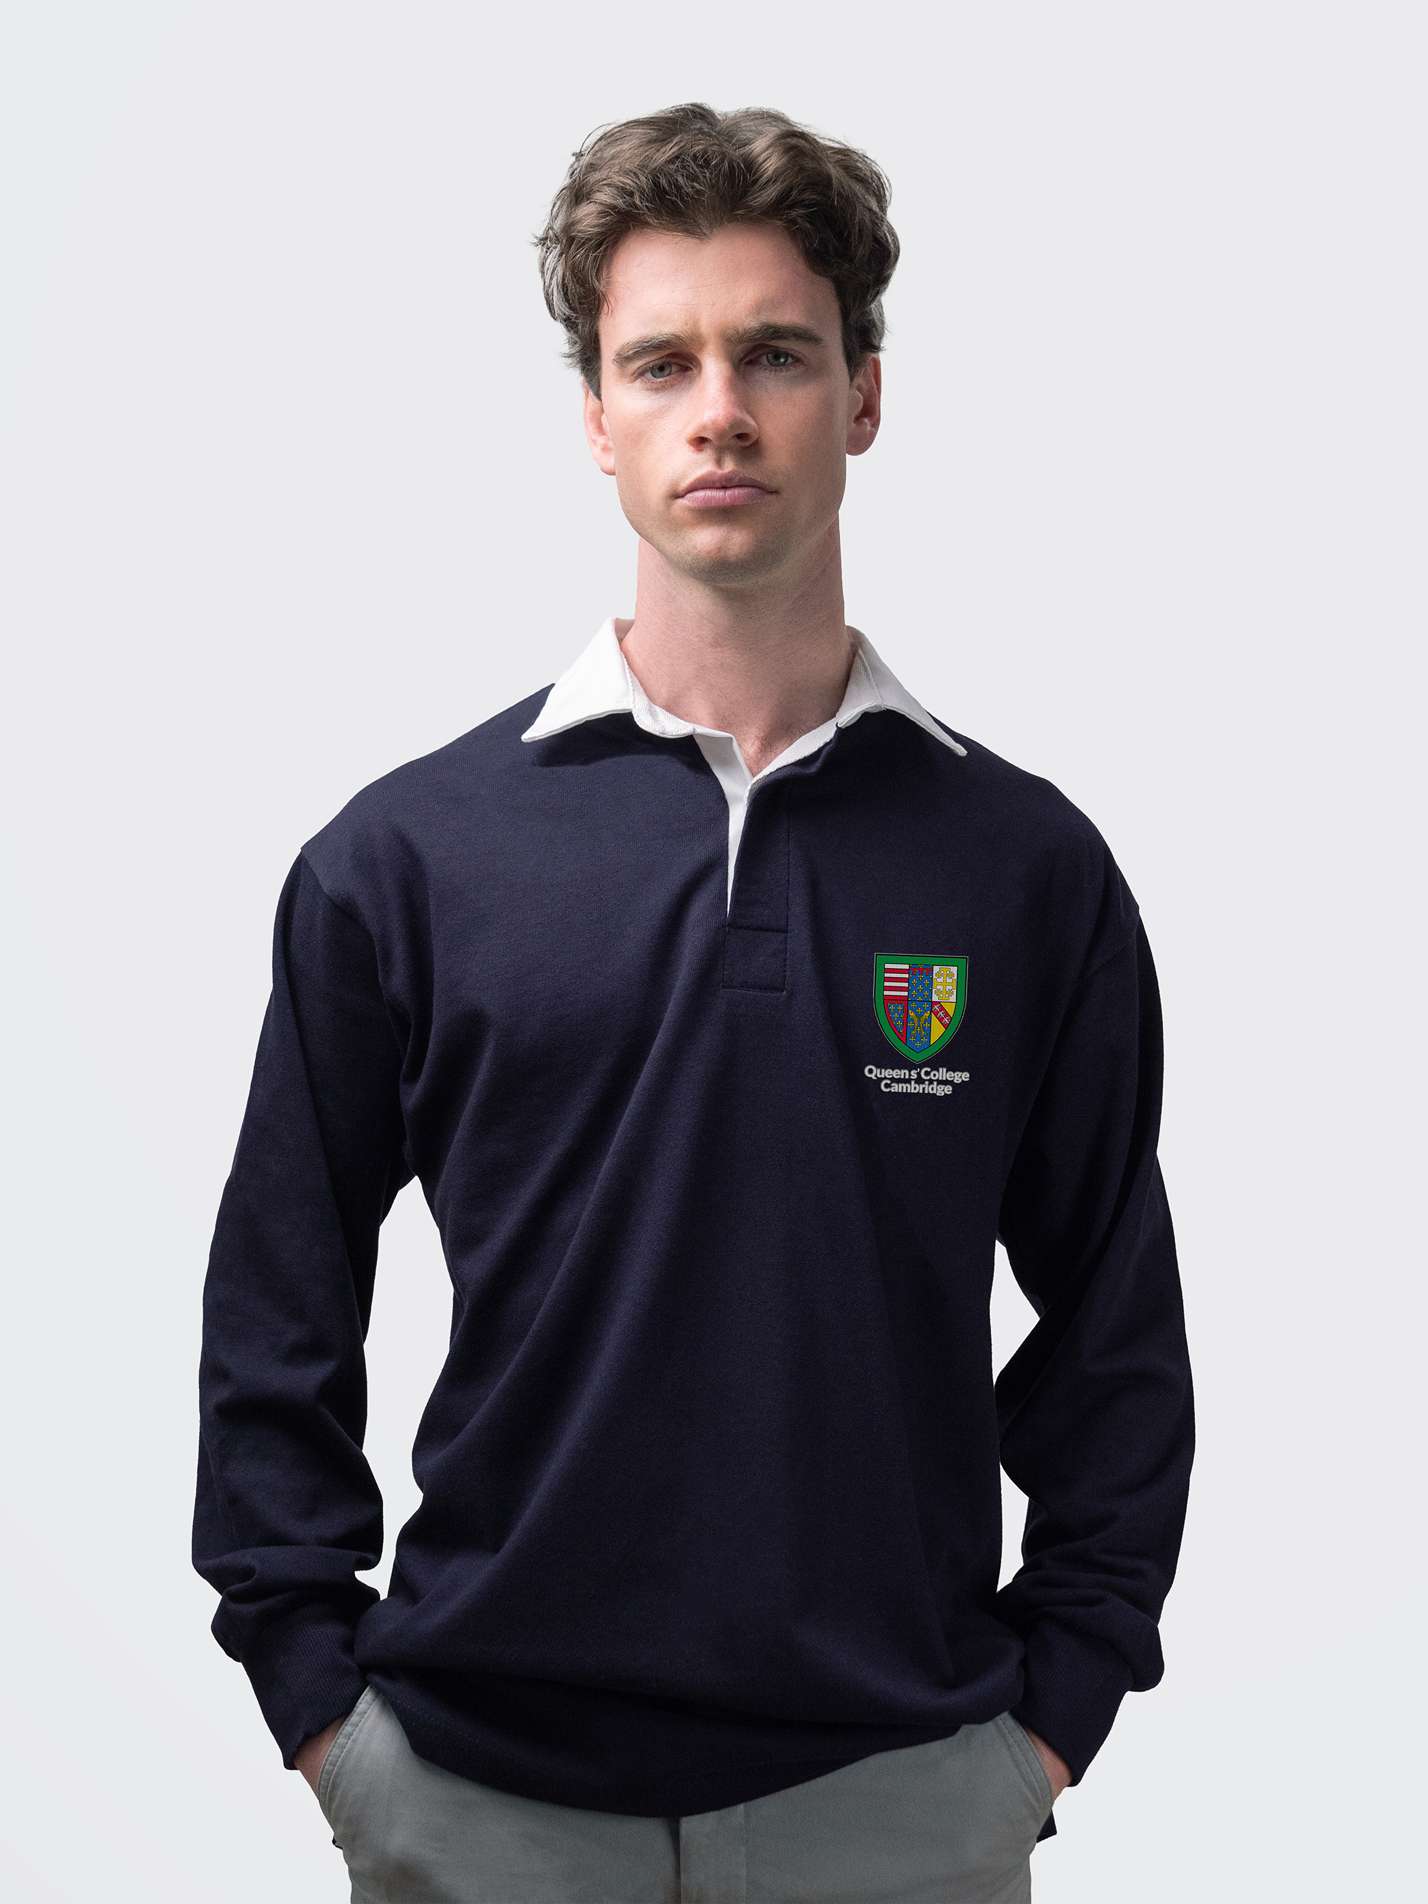 Queens' student wearing an embroidered mens rugby shirt in navy